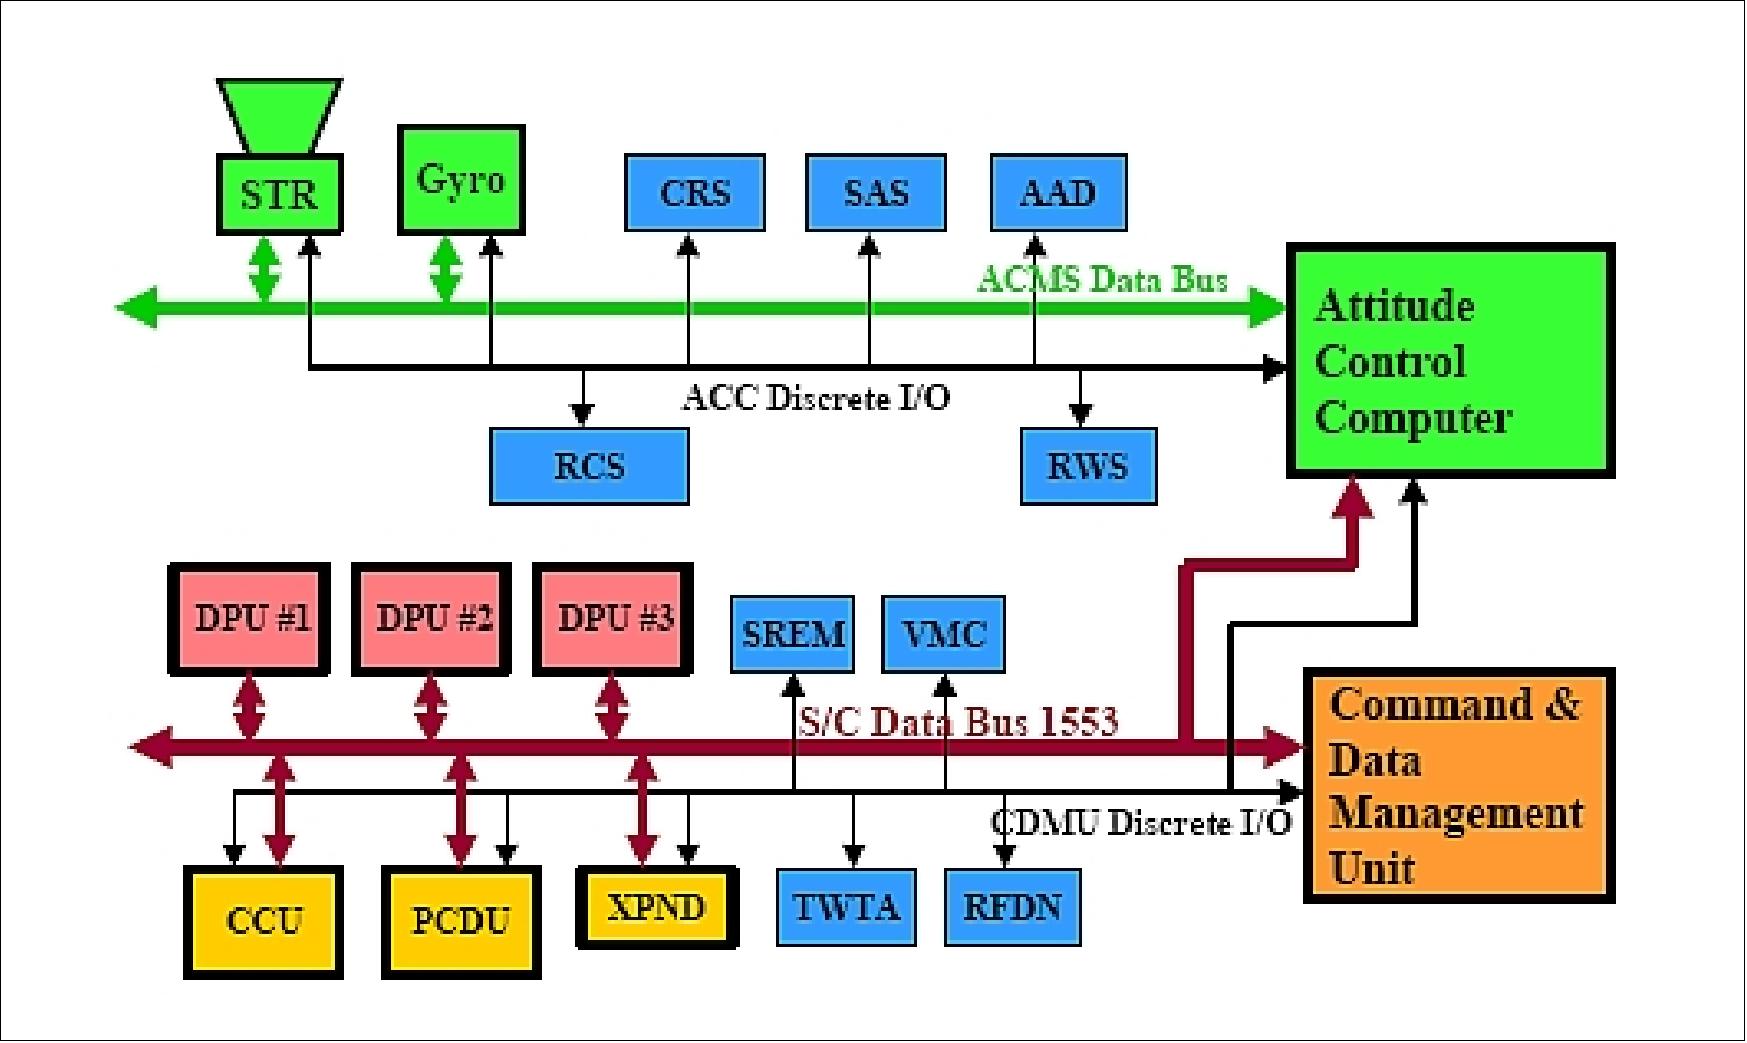 Figure 3: Overview of the avionics subsystem (image credit: TAS)